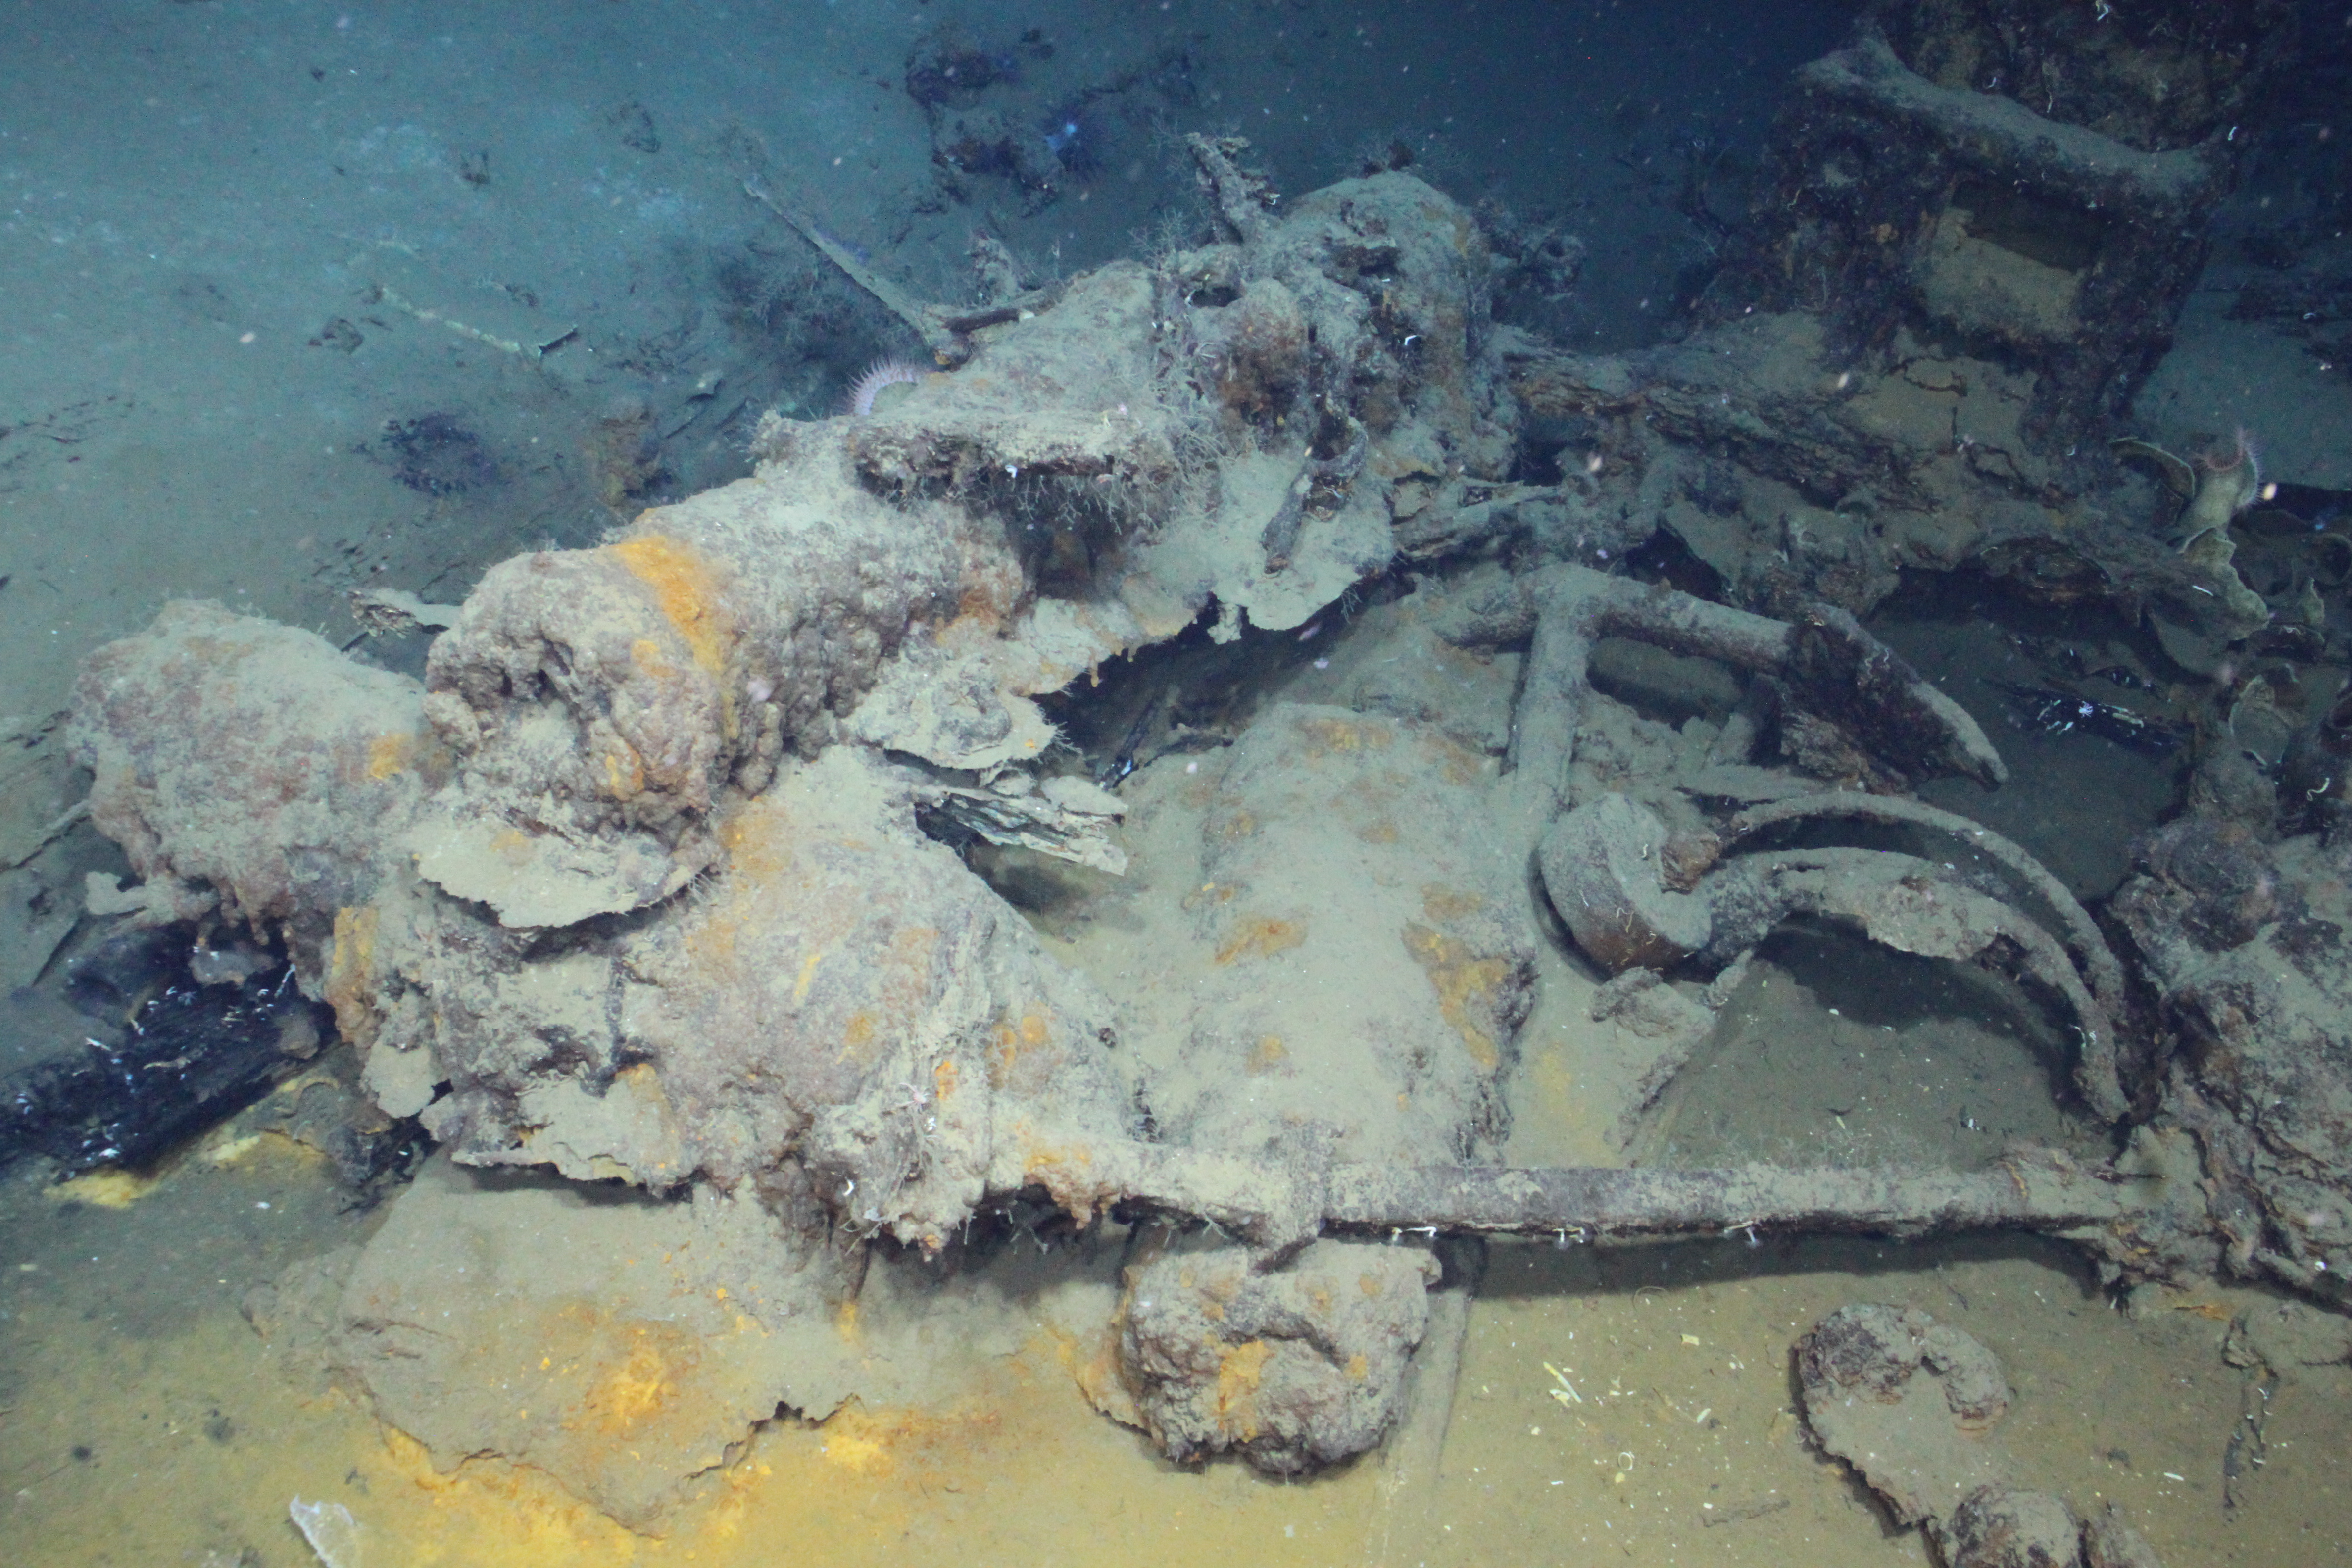 Marine archeology site; underwater, ship materials covered with silt